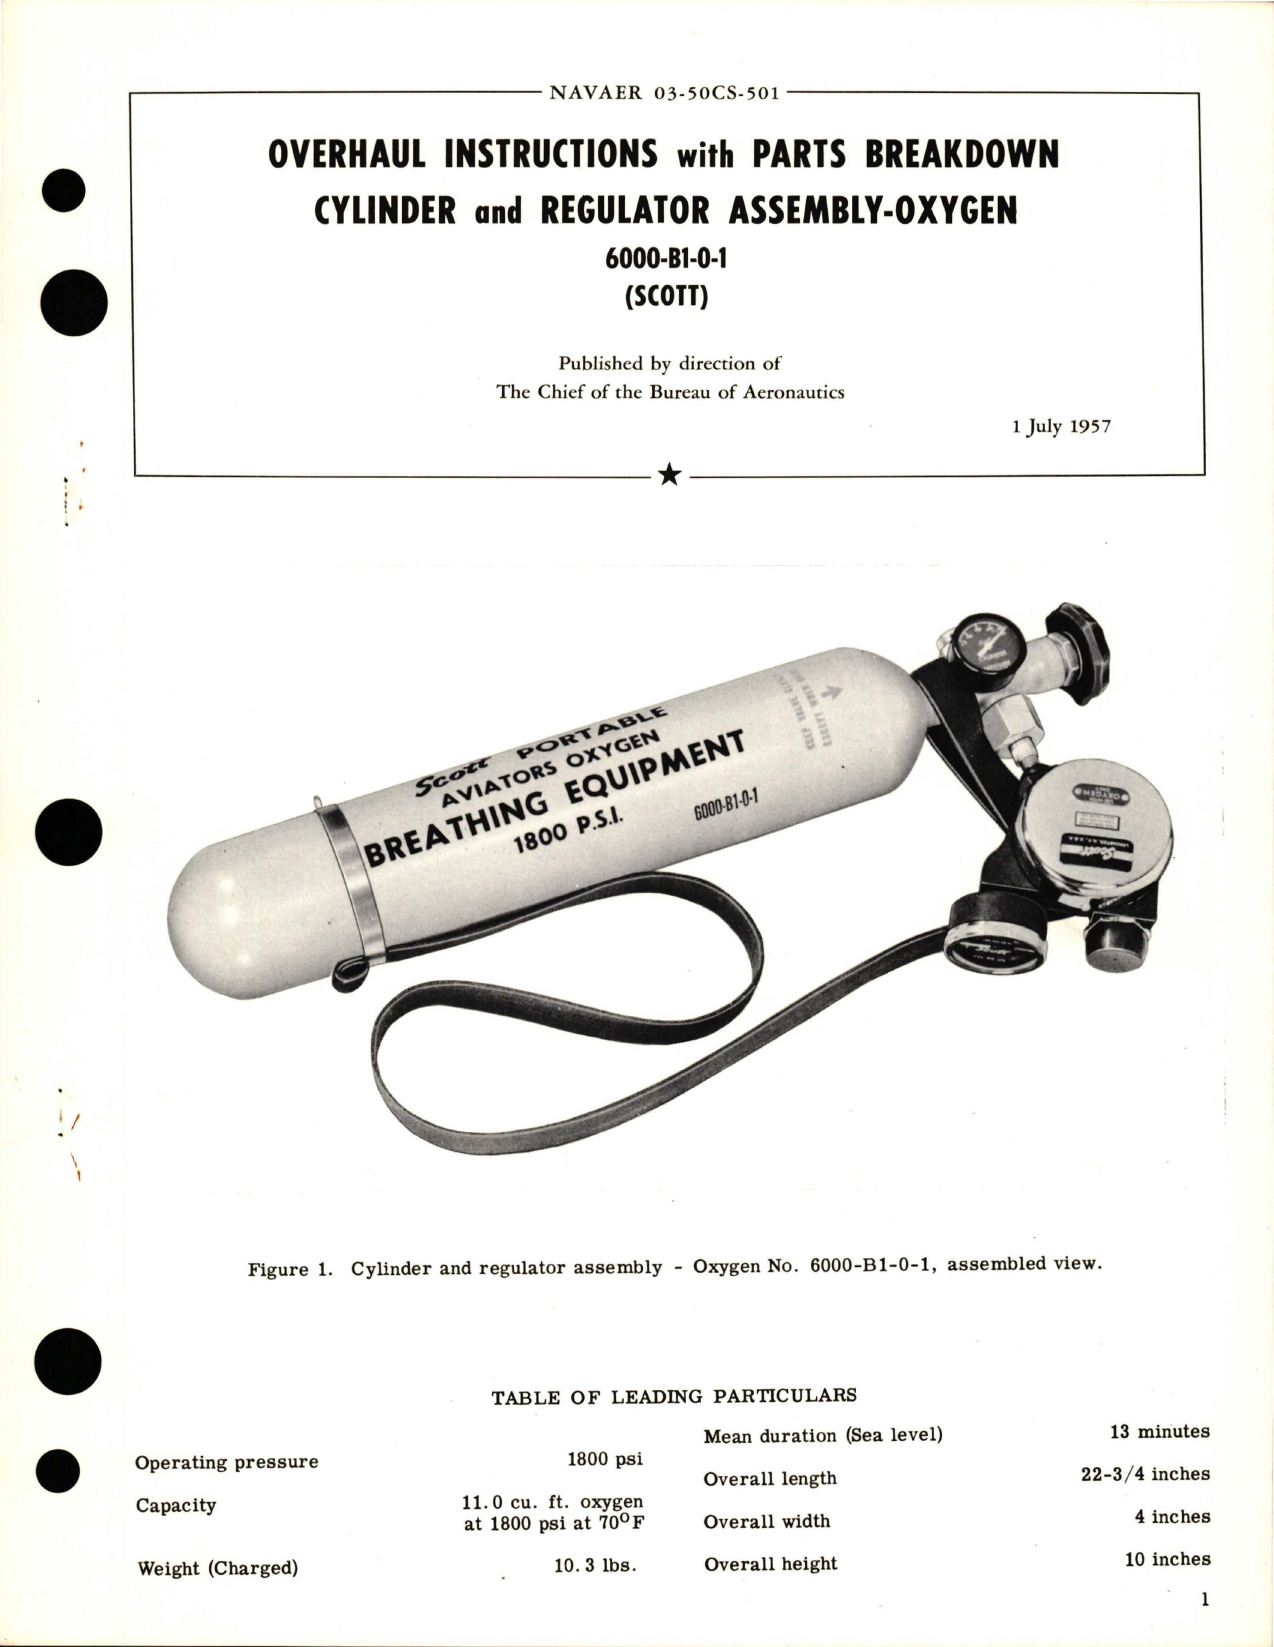 Sample page 1 from AirCorps Library document: Overhaul Instructions with Parts Breakdown for Cylinder and Regulator Oxygen Assembly - 6000-B1-0-1 